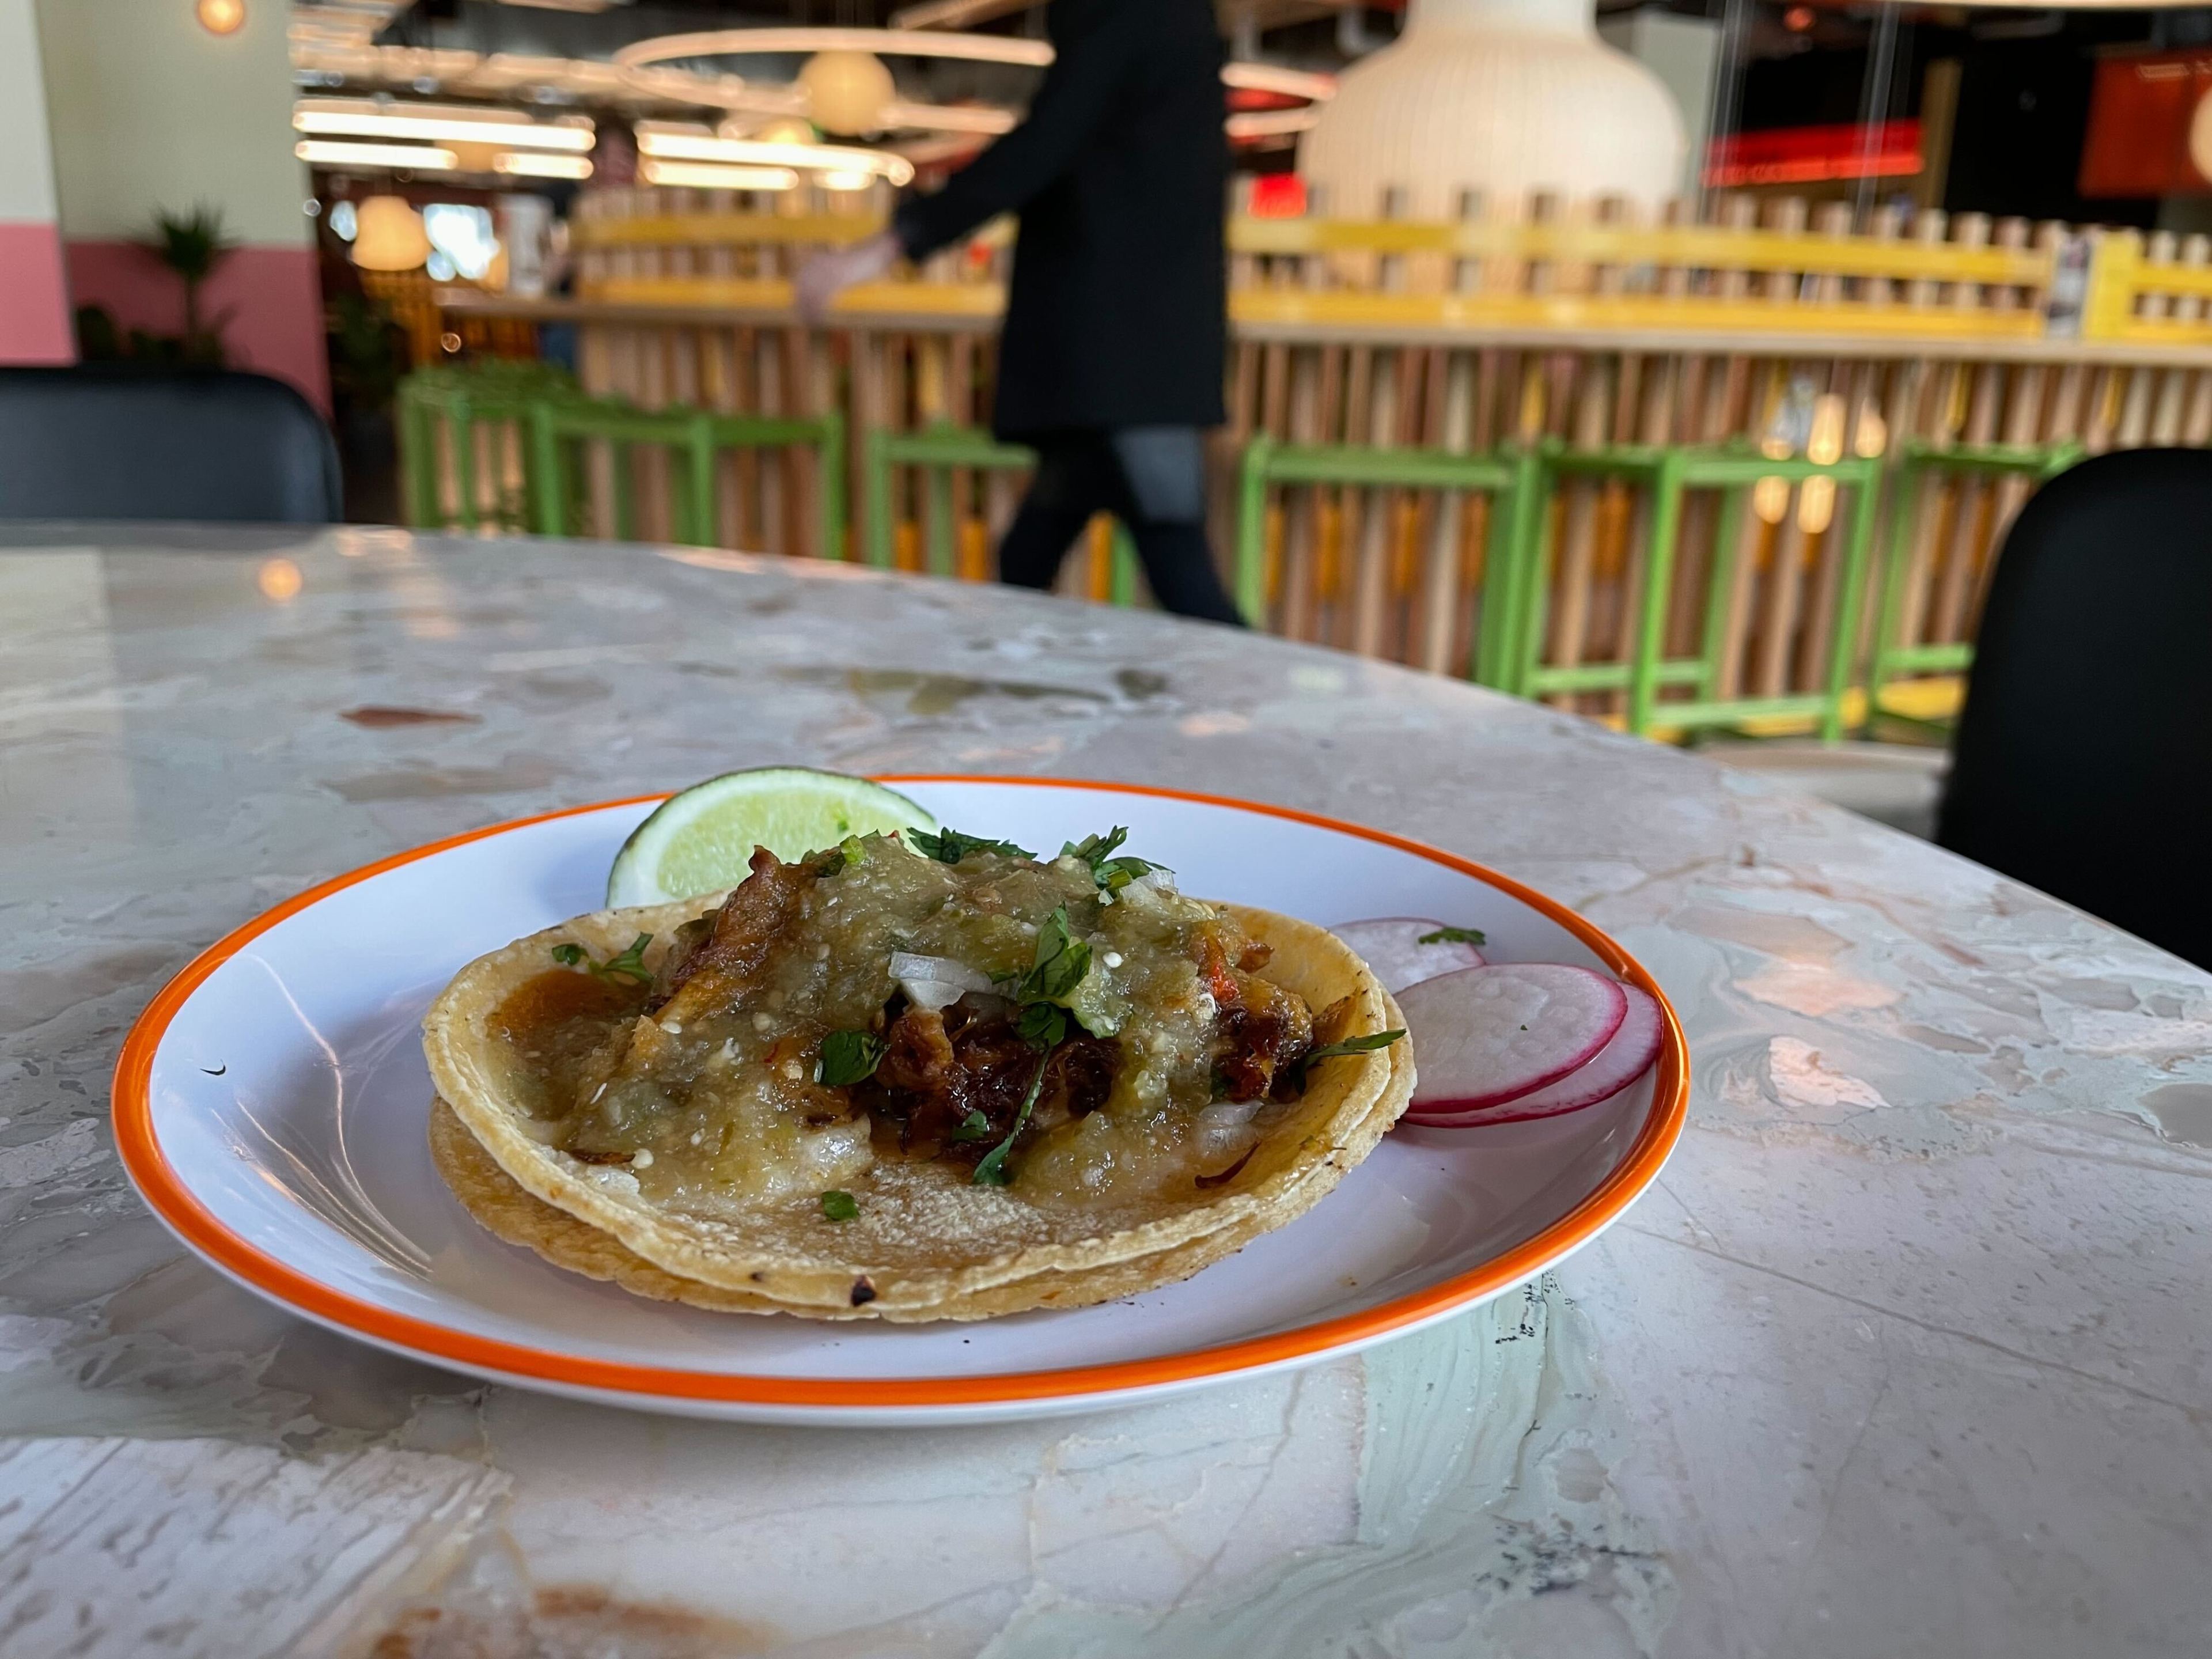 A taco with cilantro on a plate with lime, on a marble table, restaurant setting blurred in the background.